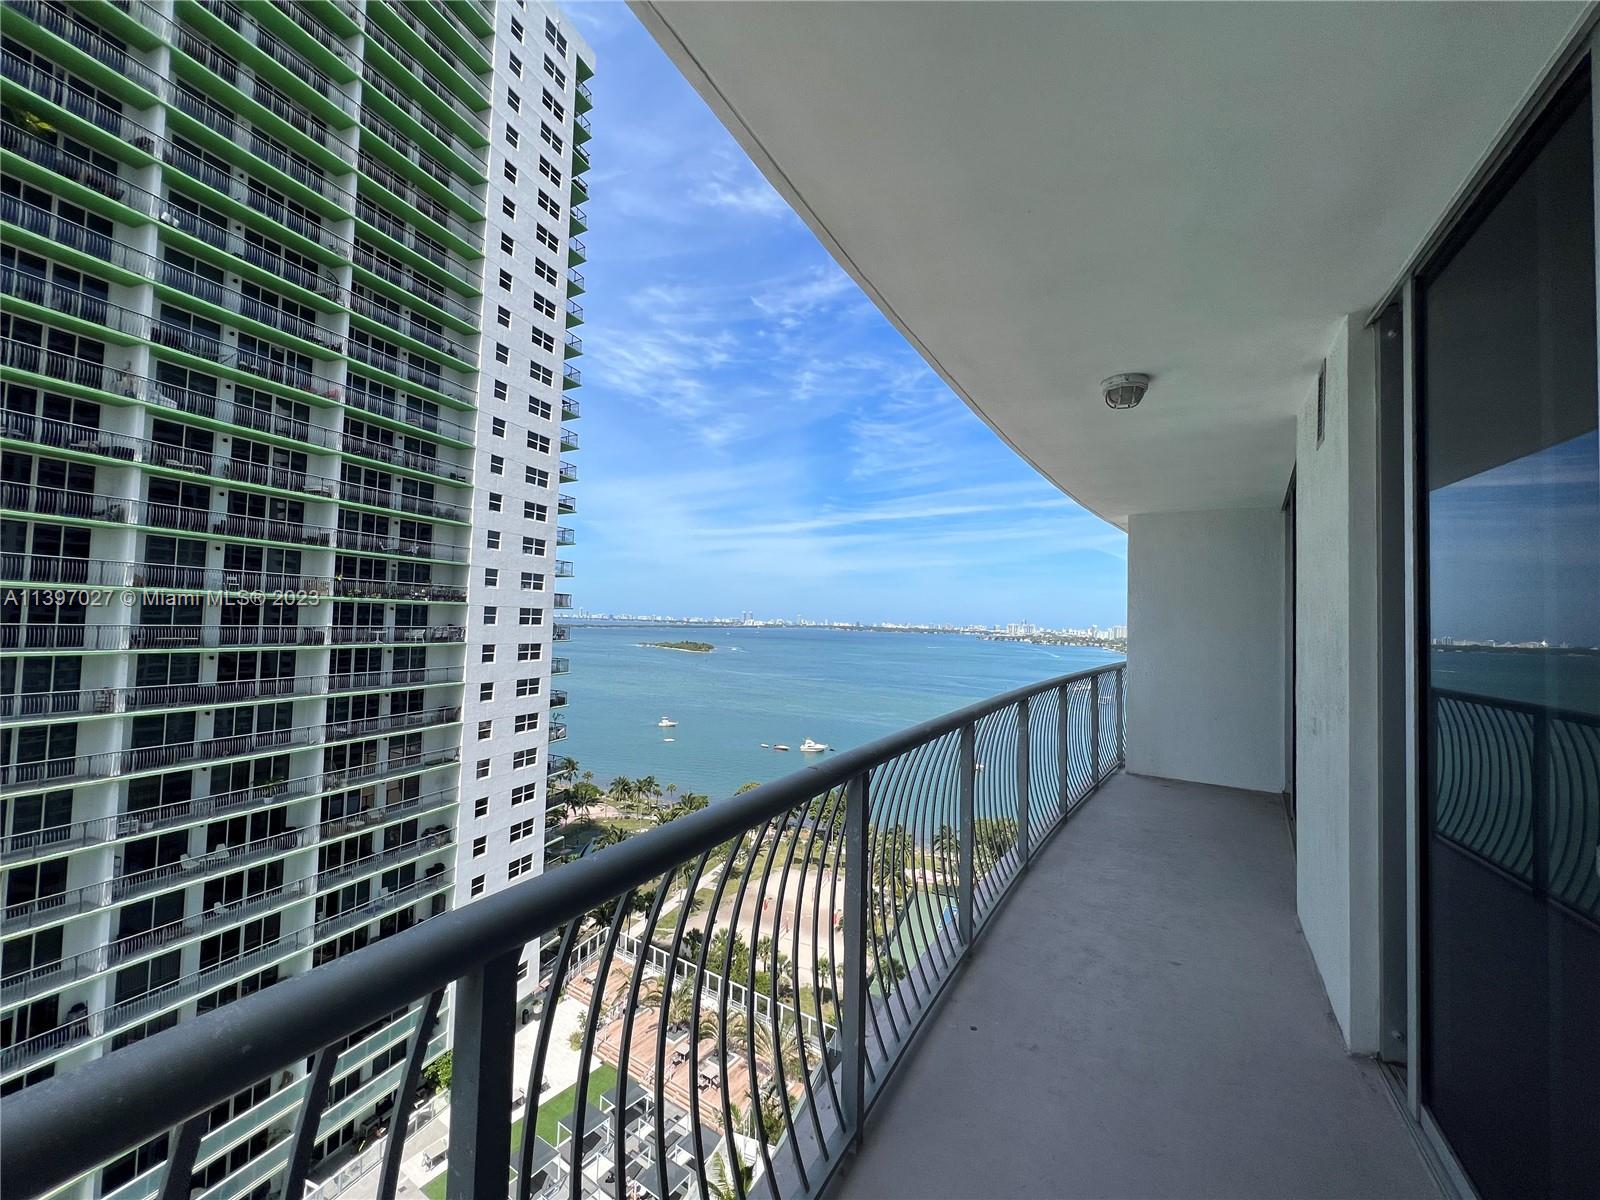 Newly remodeled unit w/many upgrades, new appliances, flooring, painted white, shades screen and blackout, flooring, paint. 21st-floor balcony w/gorgeous views of Biscayne Bay, Bayfront Park. All amenities just had a complete renovation; Pool, 2 jacuzzis, gym, sauna, event rooms & sun deck overlooking the Bay. 1 block to Metro Mover, 100yds from Publix & across the street from 8-acre Margaret Pace park on the Bay! Valet parking and ample public parking for guests. SAFE & SECURE w/multi-level 24hr security, gated parking, valet, doorman, digital facial recognition at all access points & elevator fob. Convenience store and minimart in lobby.